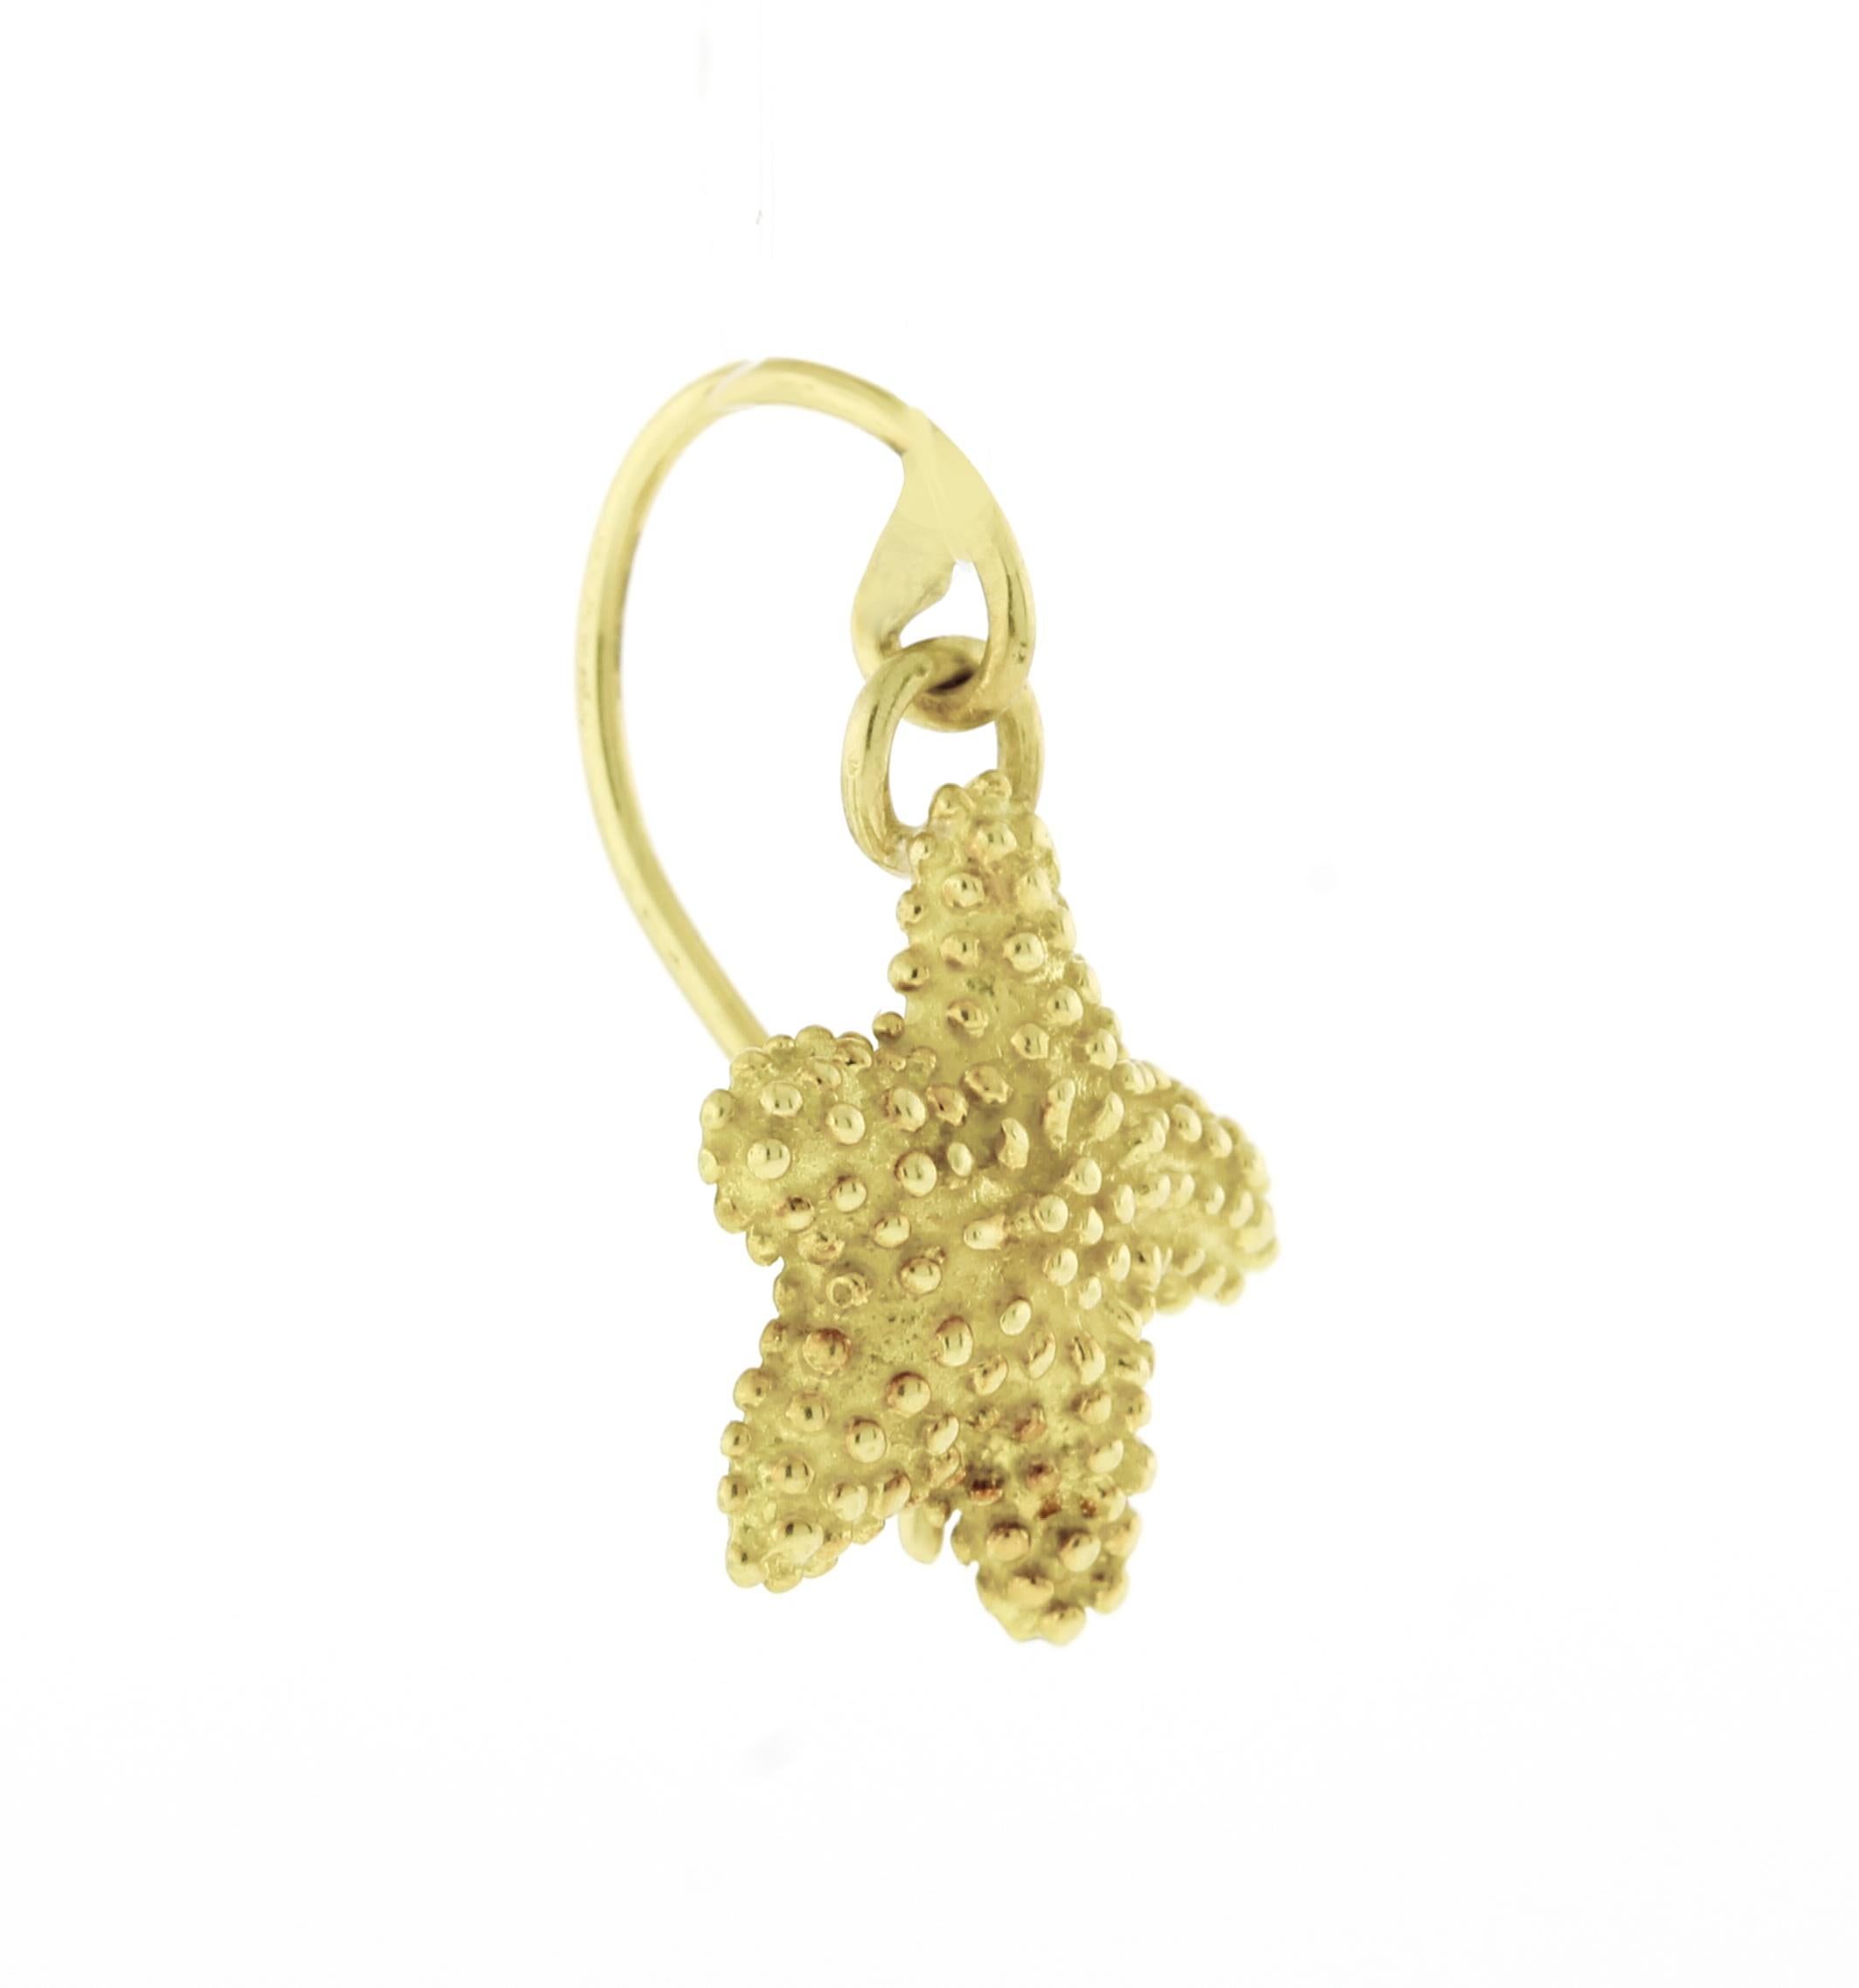 From Tiffany &  Co, a pair of textured  starfish drop gold earrings
♦ Designer: Tiffany & Co. 
♦ Metal: 18 karat
♦ Circa 1980s
♦ ½ across 
♦ 5.3 grams
♦ Packaging: Tiffany pouch
♦ Condition: Excellent , pre-owned
♦ Price: Based on the market, prices